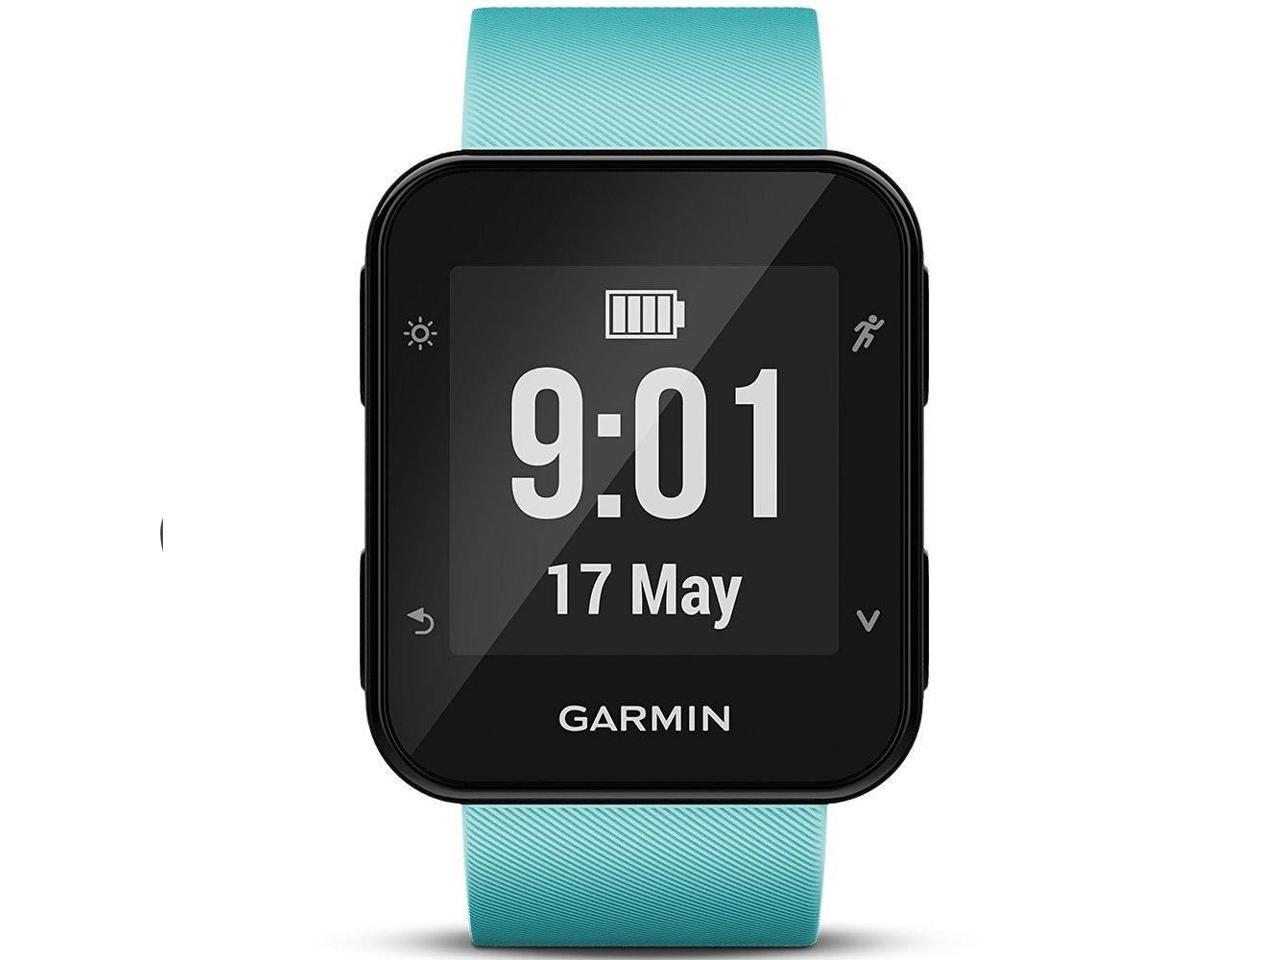 Garmin Forerunner 35 Fitness GPS Running Watch with HRM Frost Blue Edition Model 010-01689-12